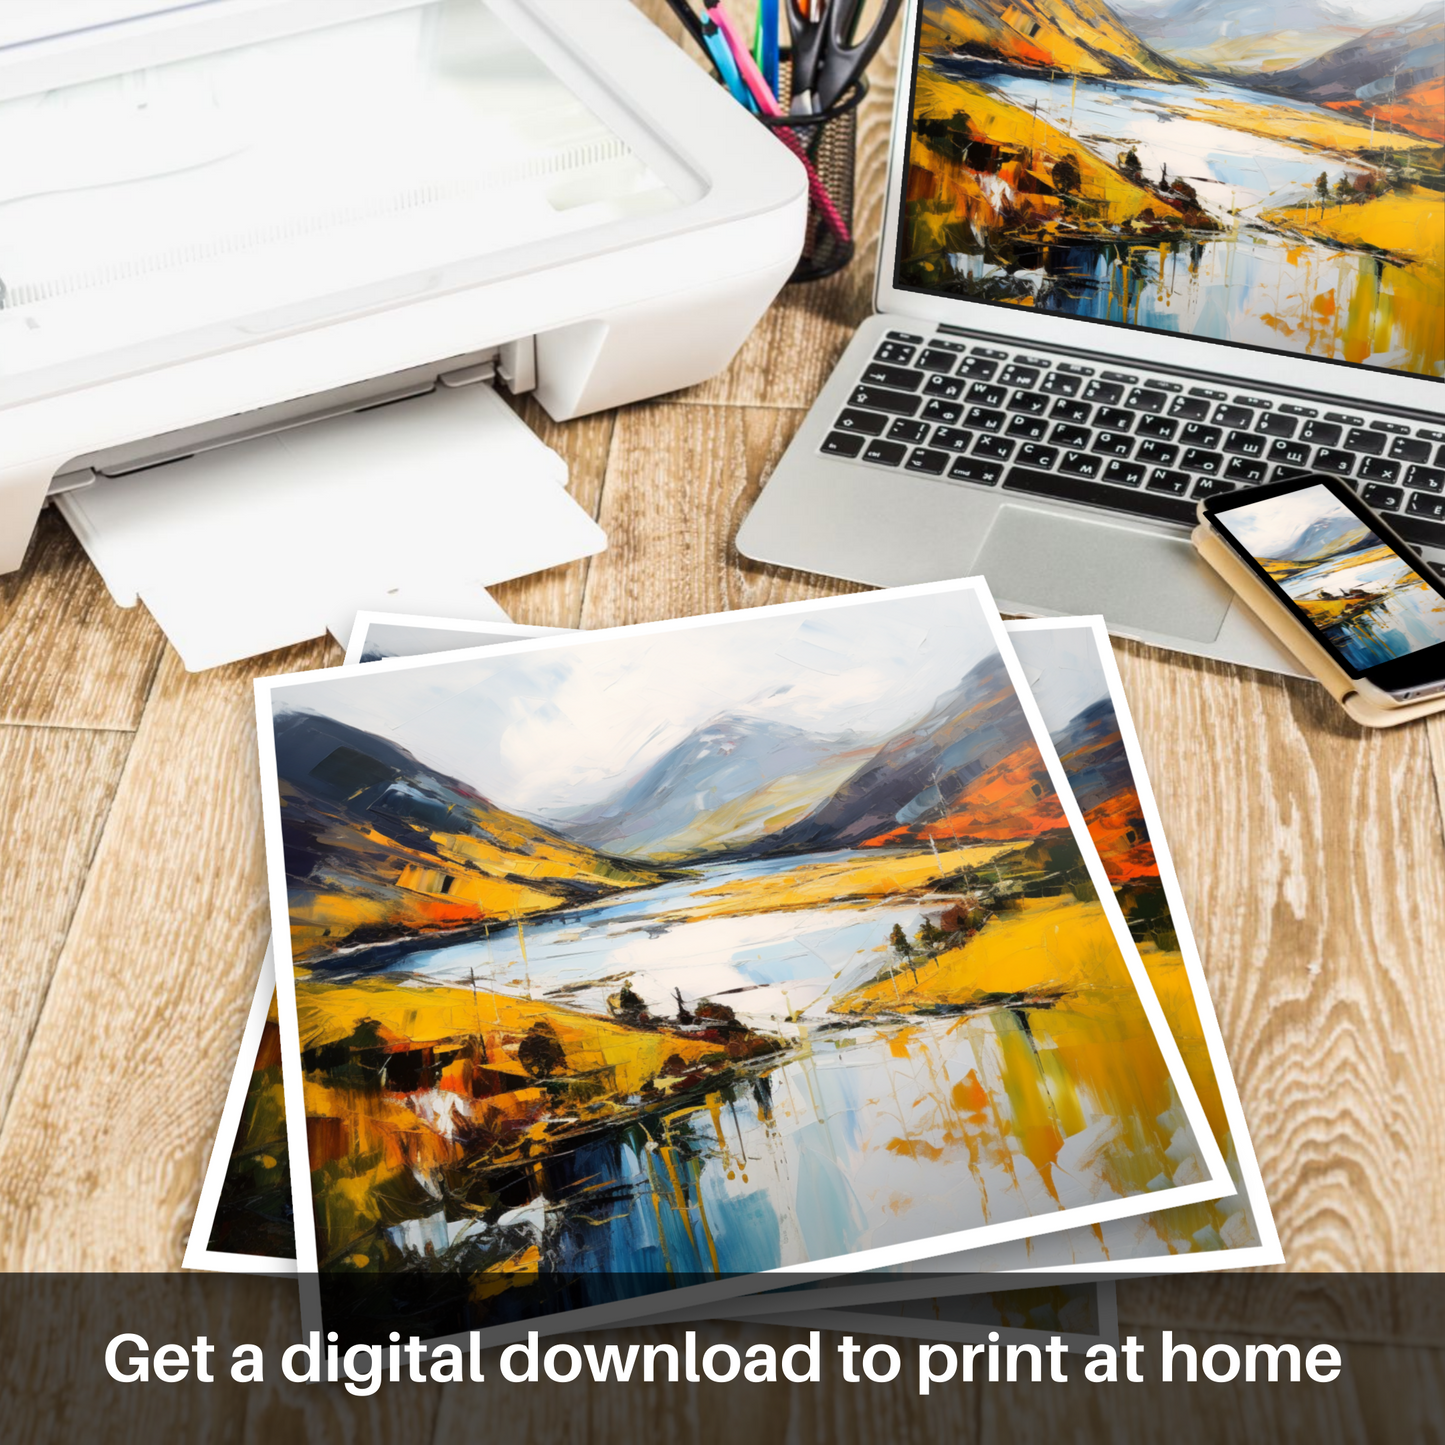 Downloadable and printable picture of Loch Shiel, Highlands